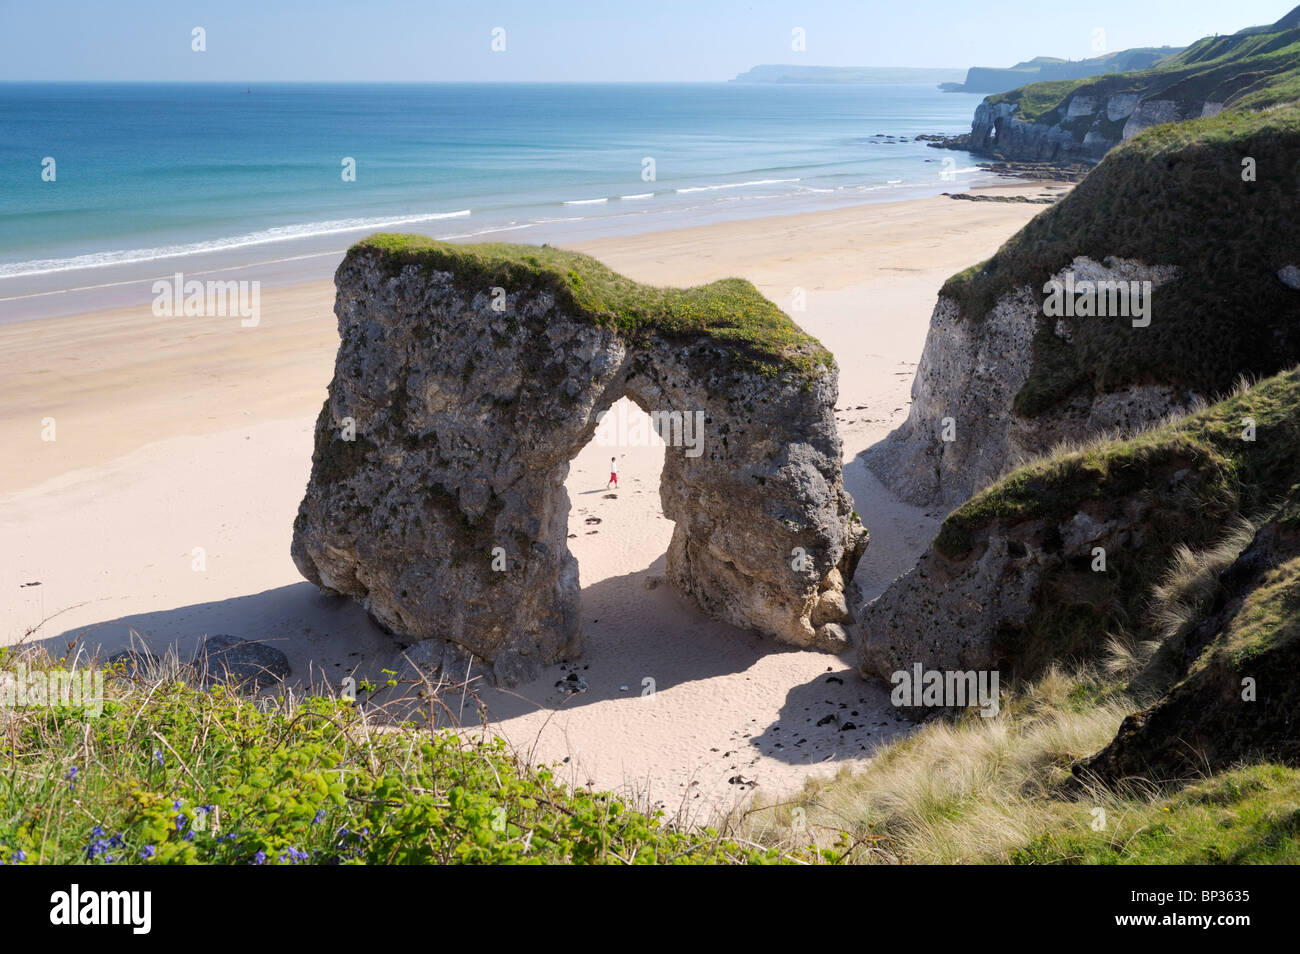 Young woman walks on deserted beach at the White Rocks between Portrush and Bushmills, Northern Ireland. Eroded limestone cliffs Stock Photo